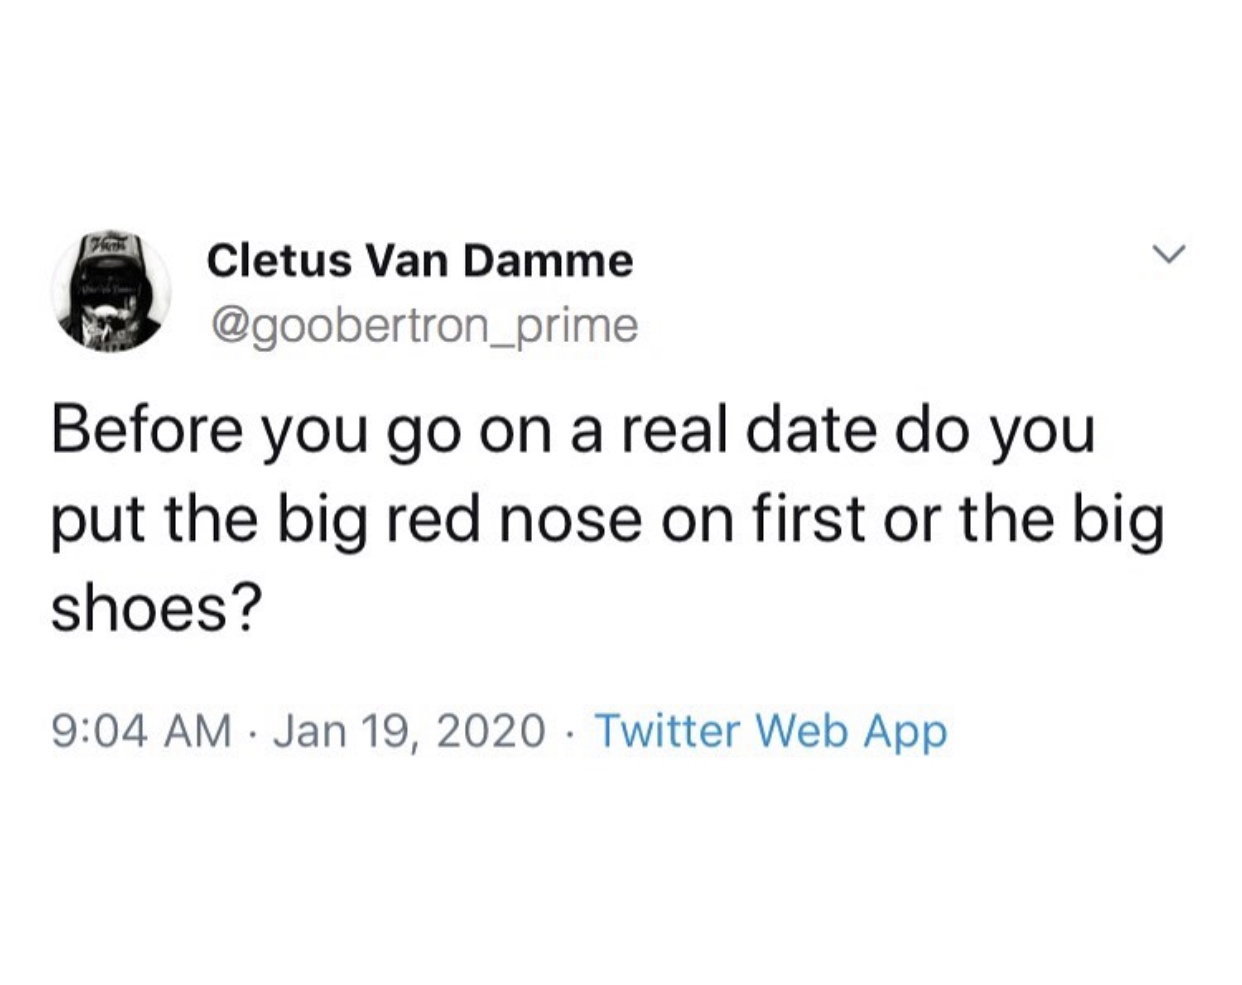 beatles big time rush meme - Cletus Van Damme Before you go on a real date do you put the big red nose on first or the big shoes? Twitter Web App